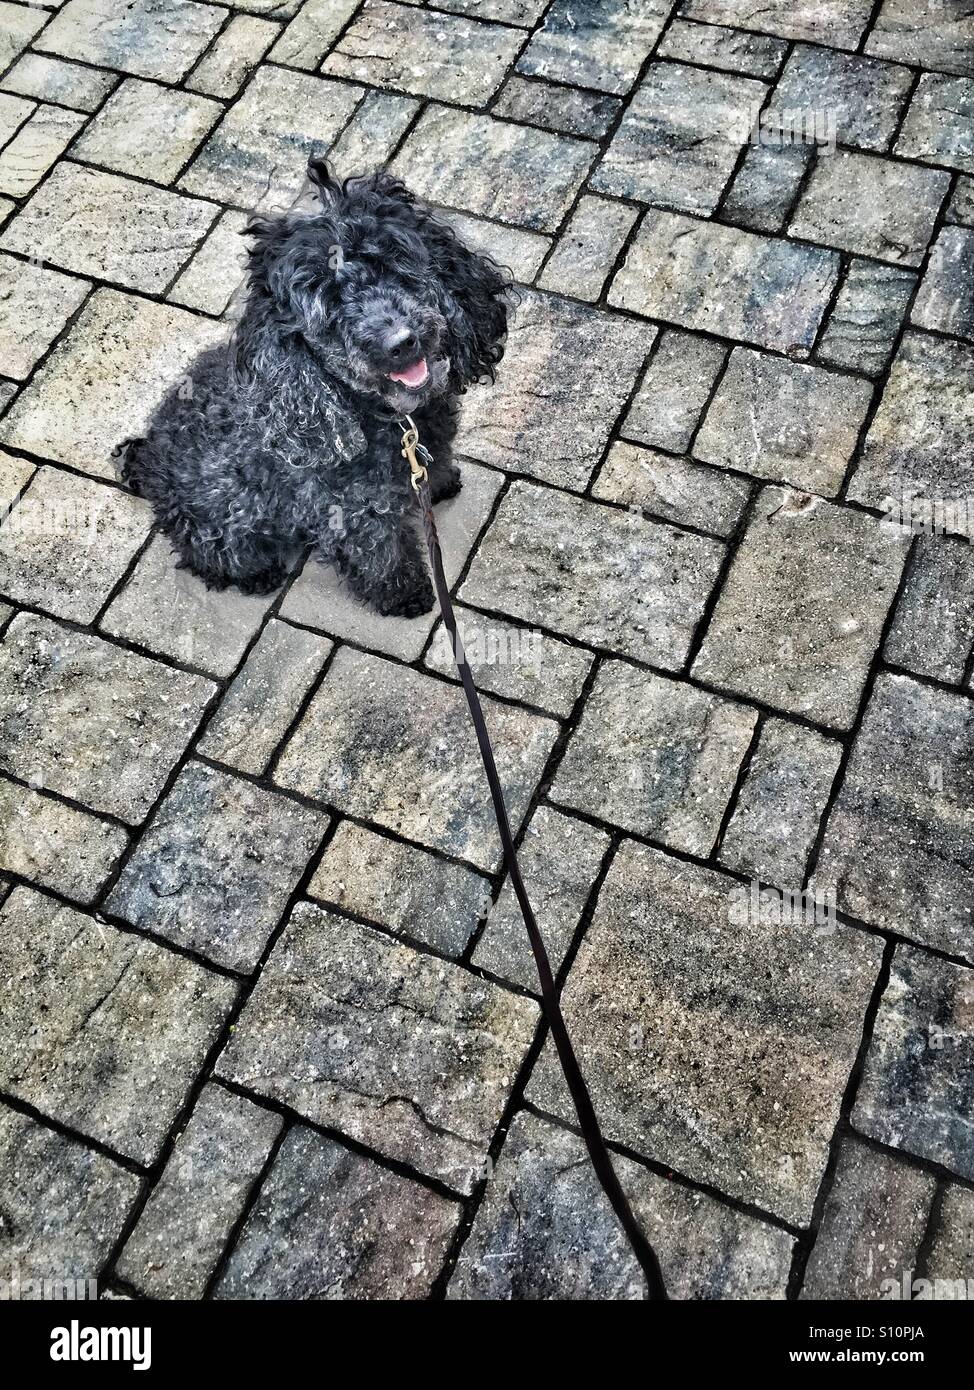 Shaggy miniature black poodle on a leash sitting outside on patio stones waiting to go for a walk Stock Photo